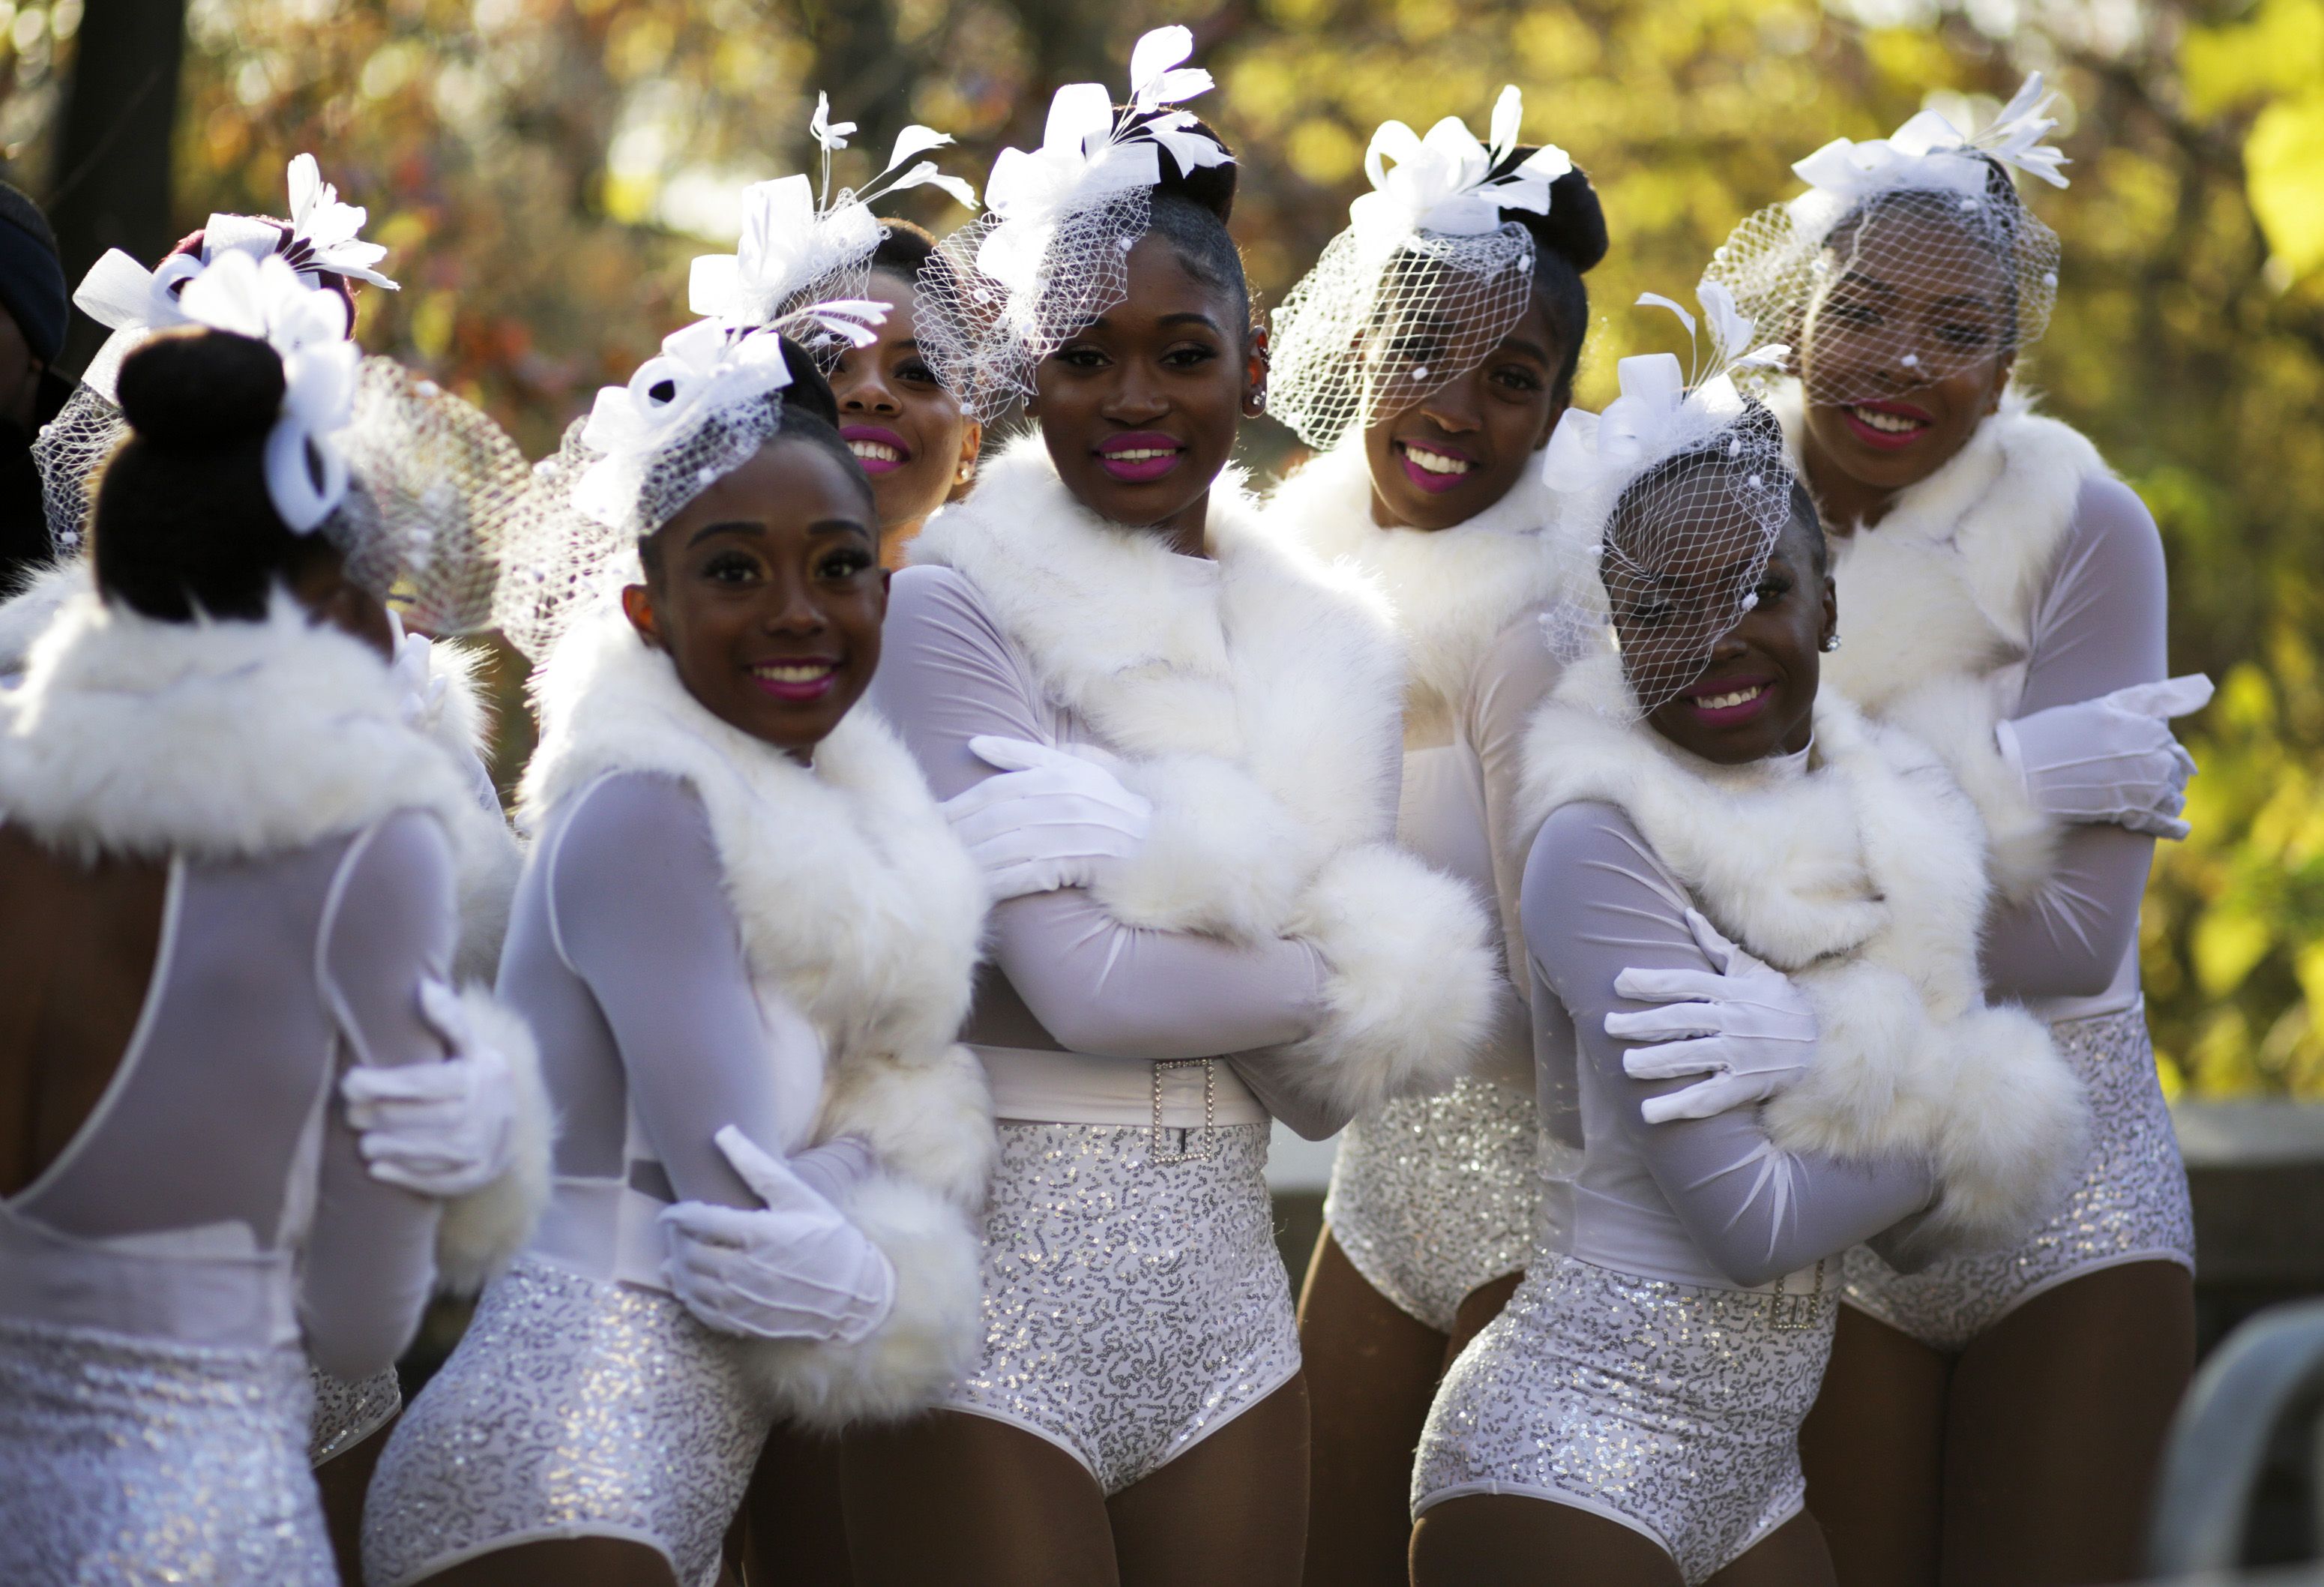 Revellers get ready to take part during the 95th-annual Macys Thanksgiving Day Parade